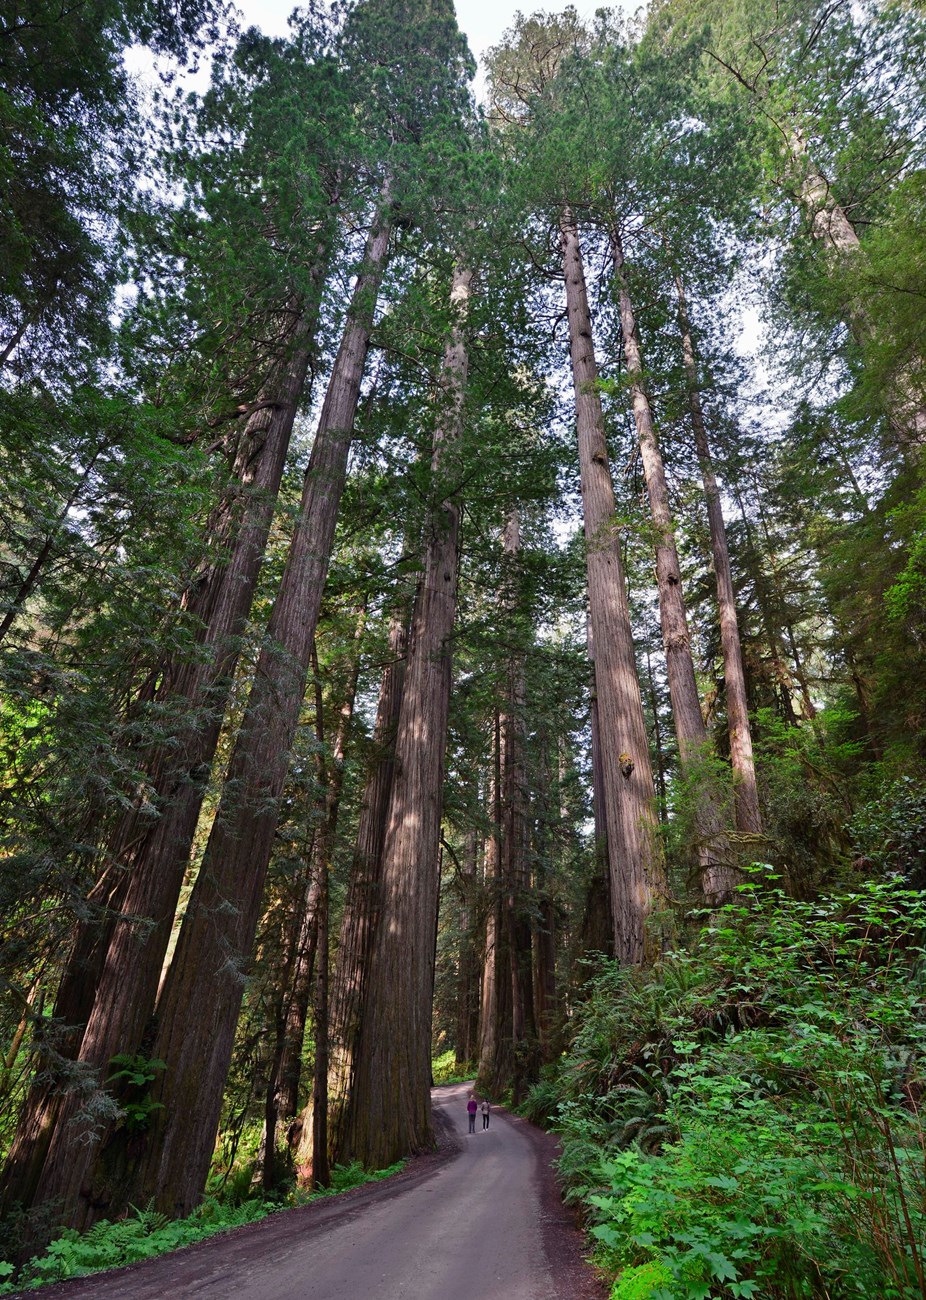 Two people walk on a narrow, winding road through a forest of tall redwood trees.